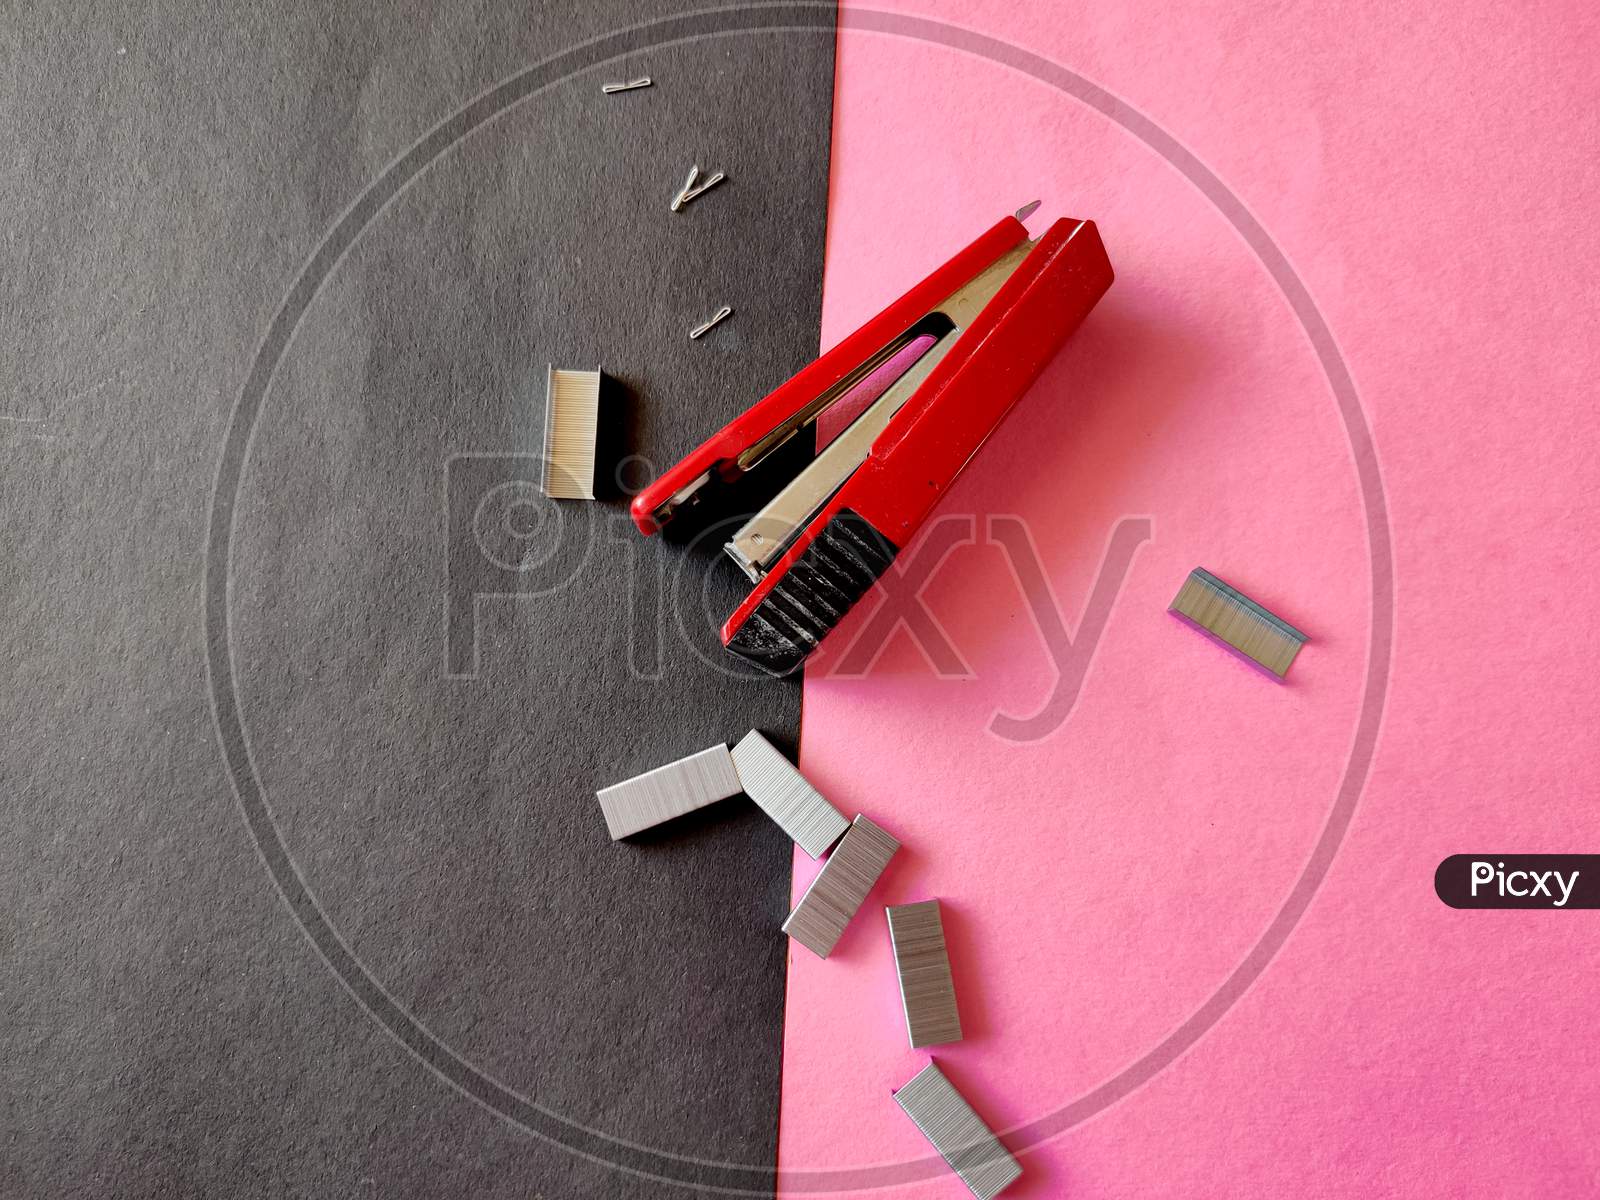 Top View Of Red Color Stapler And Pile Of Stapler Pins Isolated On Pink Background